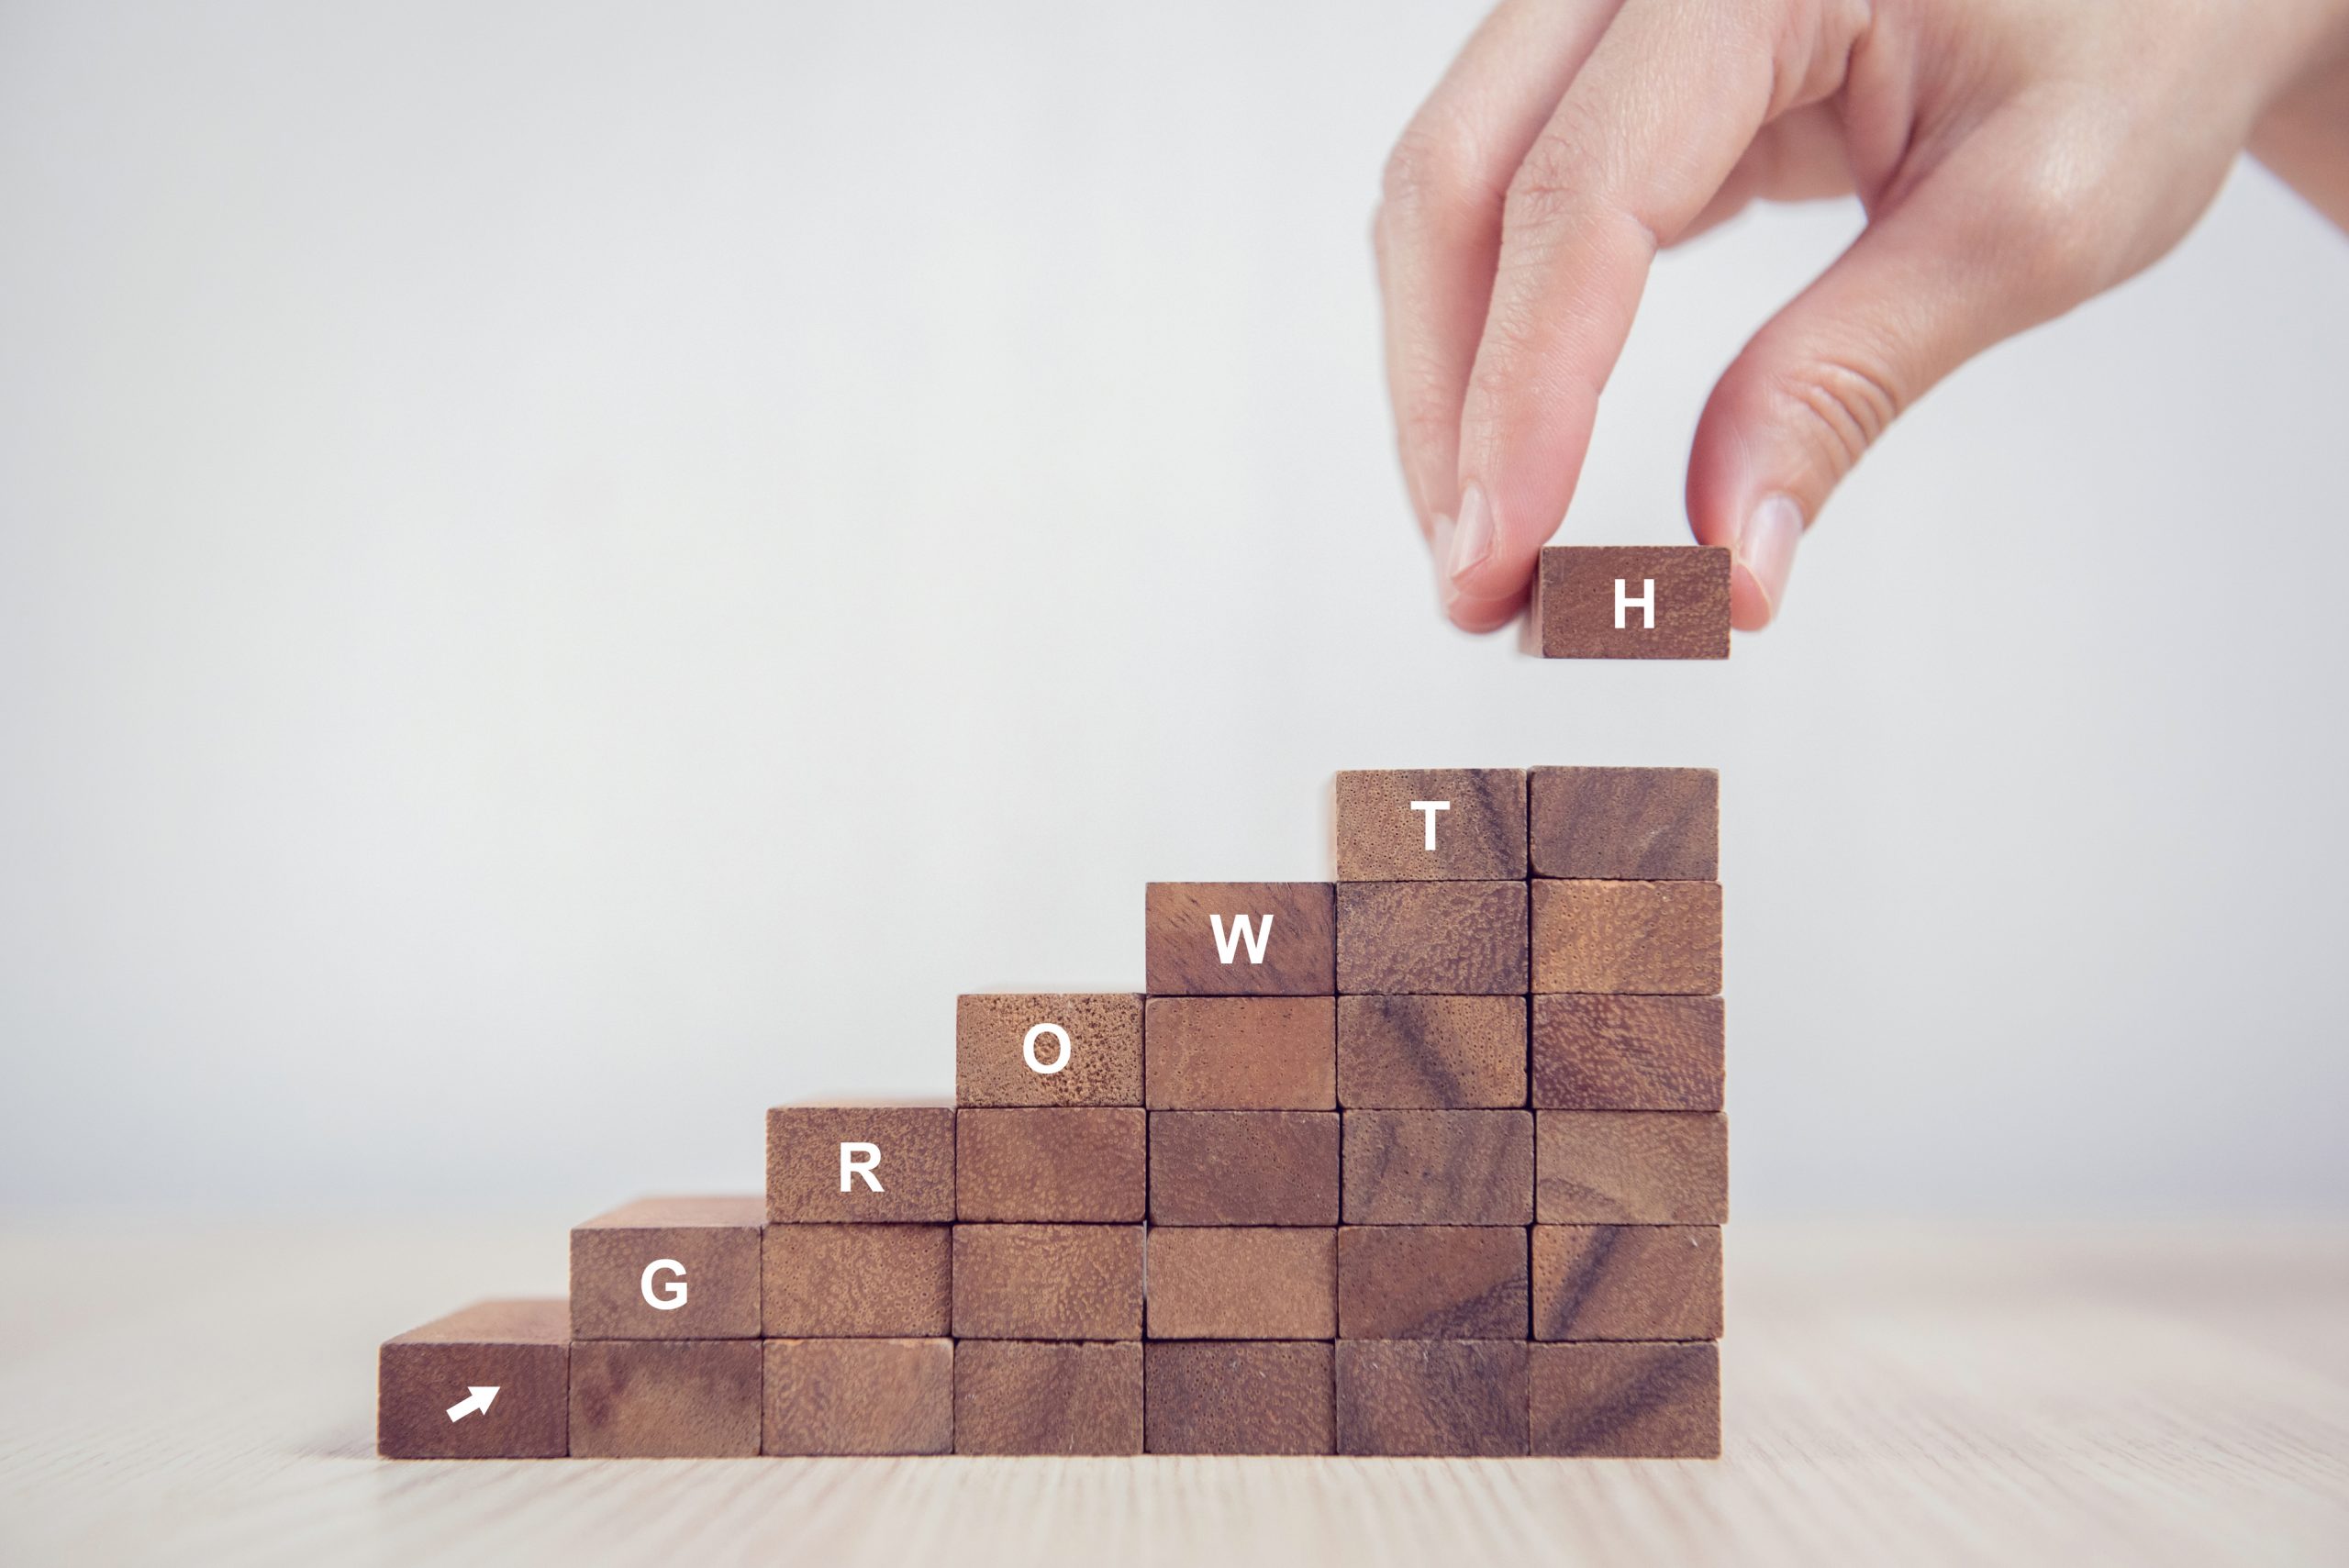 How to scale your sales program. Blocks stacked up spelling out growth.